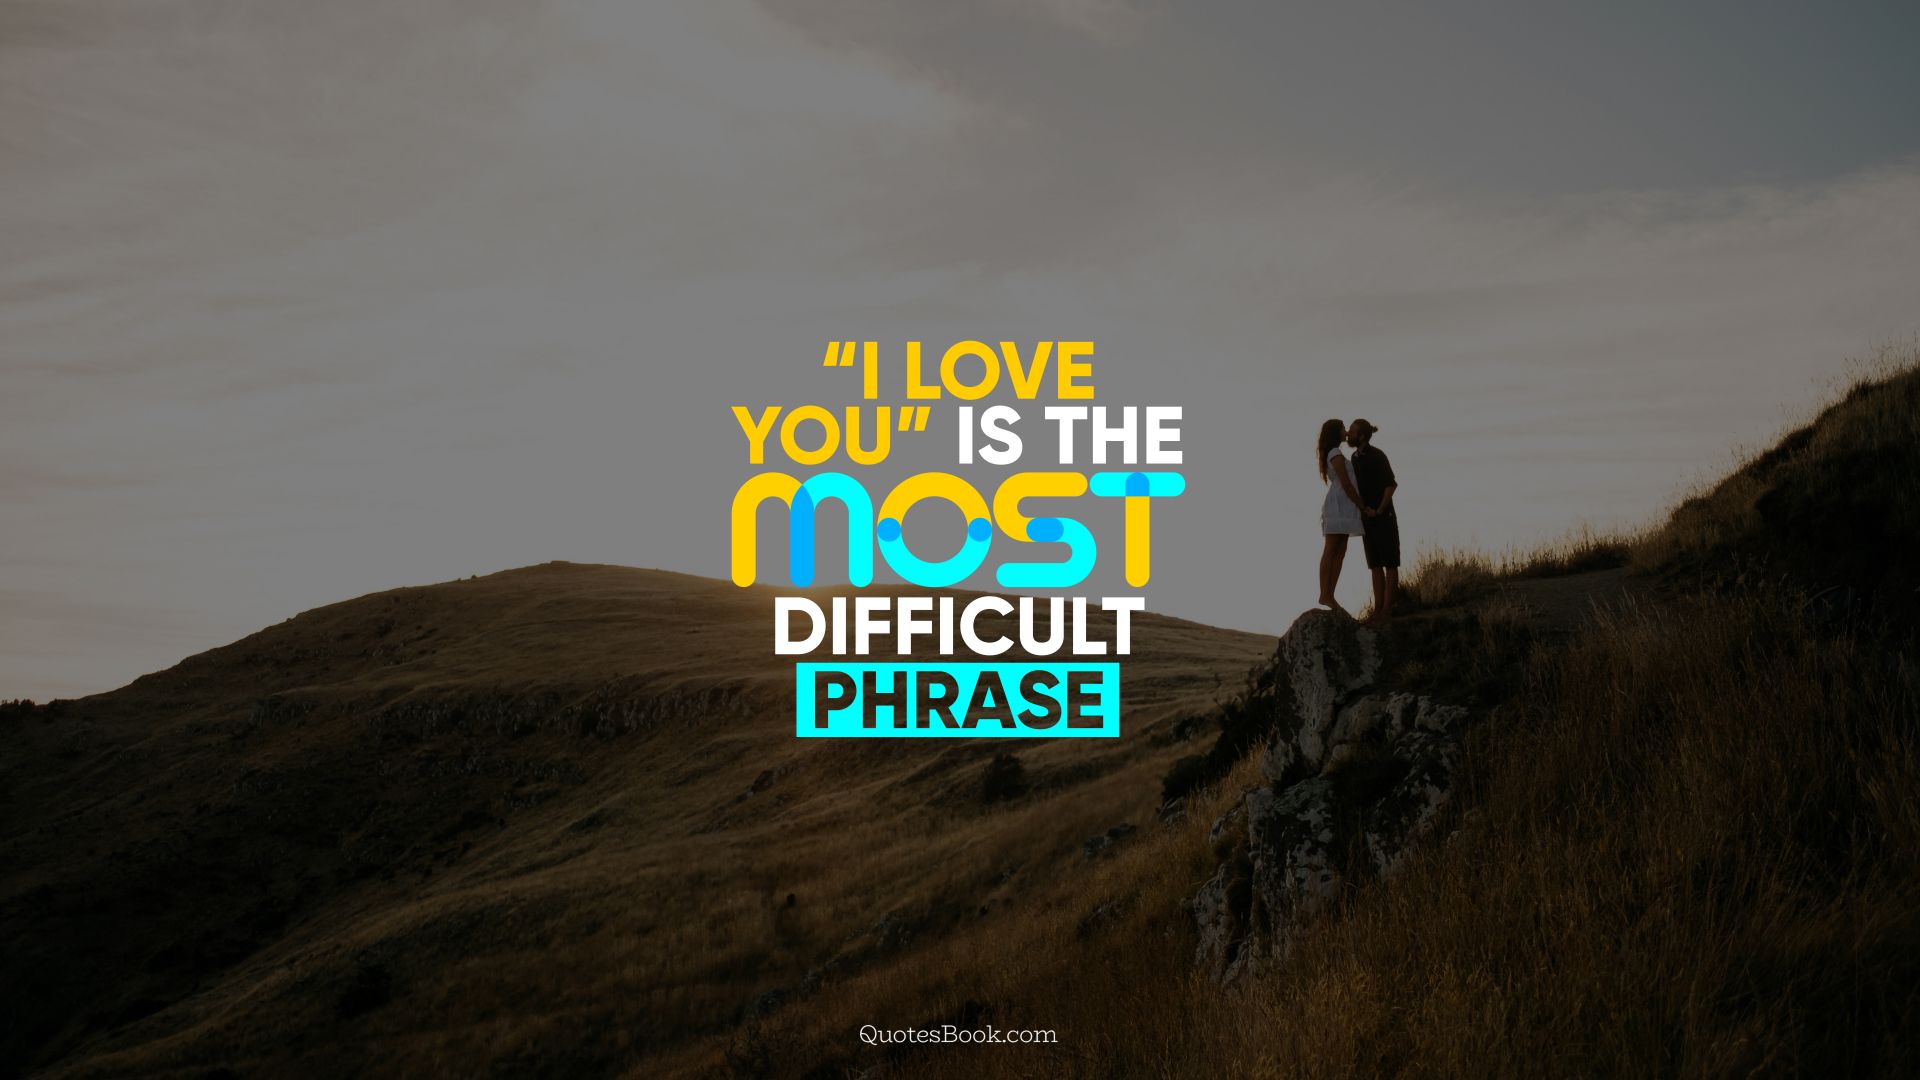 “I love you” is the most difficult phrase. - Quote by QuotesBook